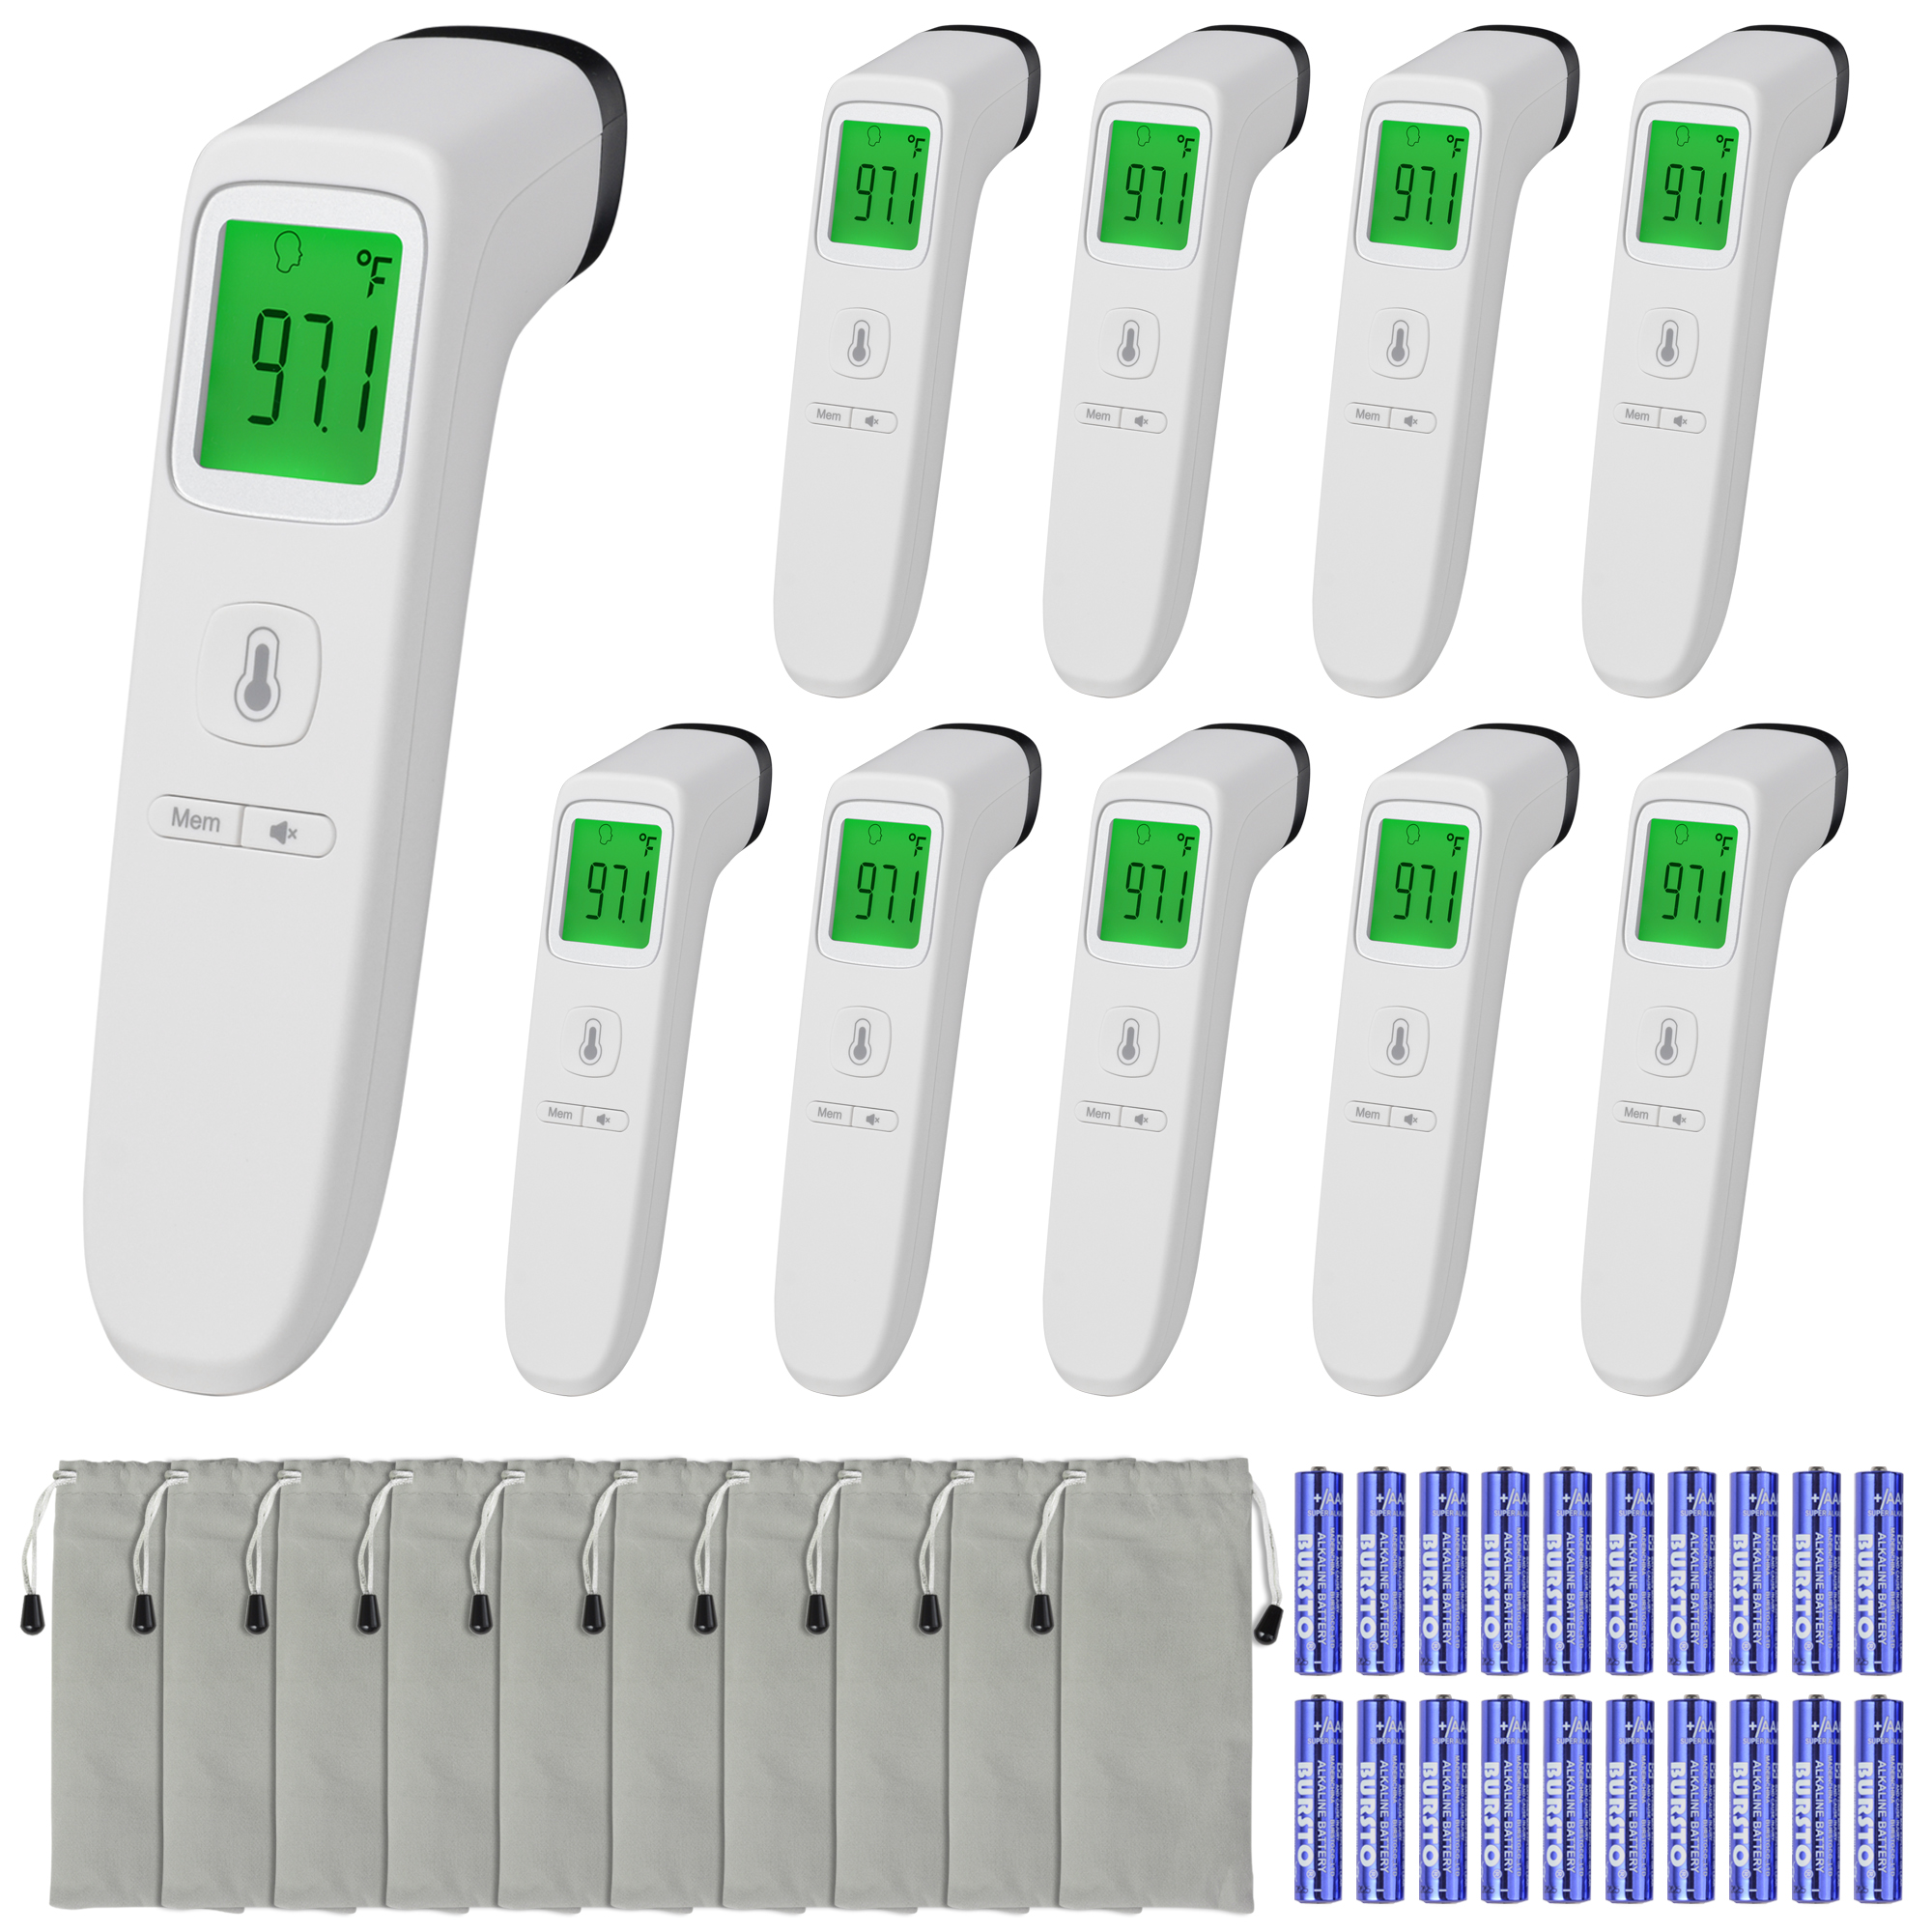 Yescom No Contact Digital Infrared Thermometer Measuring Body Memory Function 10 Pack